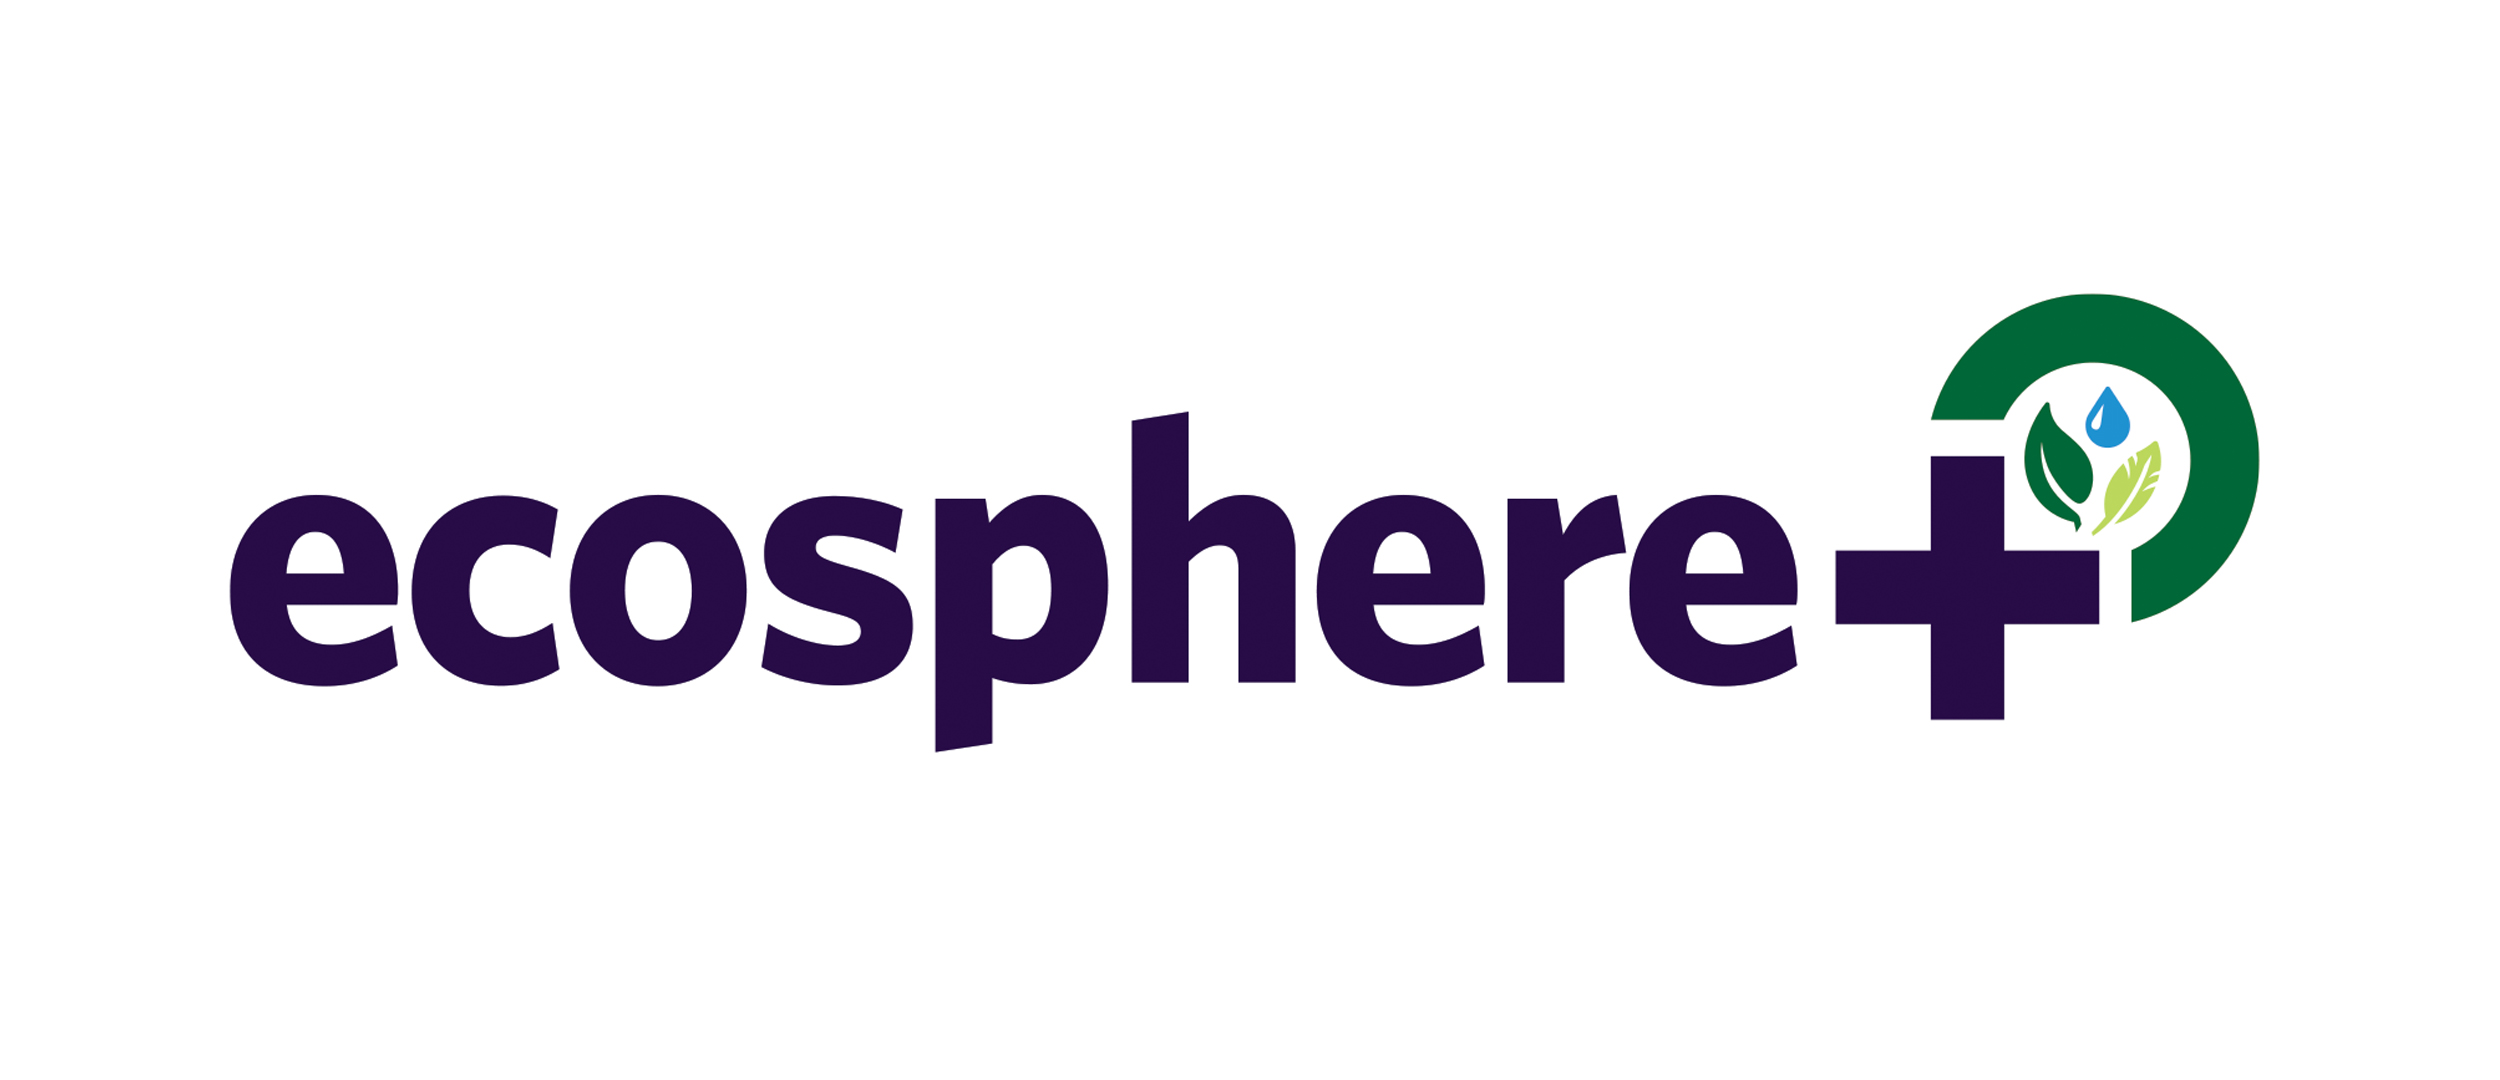 Ecosphere+ Makes Senior Appointments And Announces New Collaboration